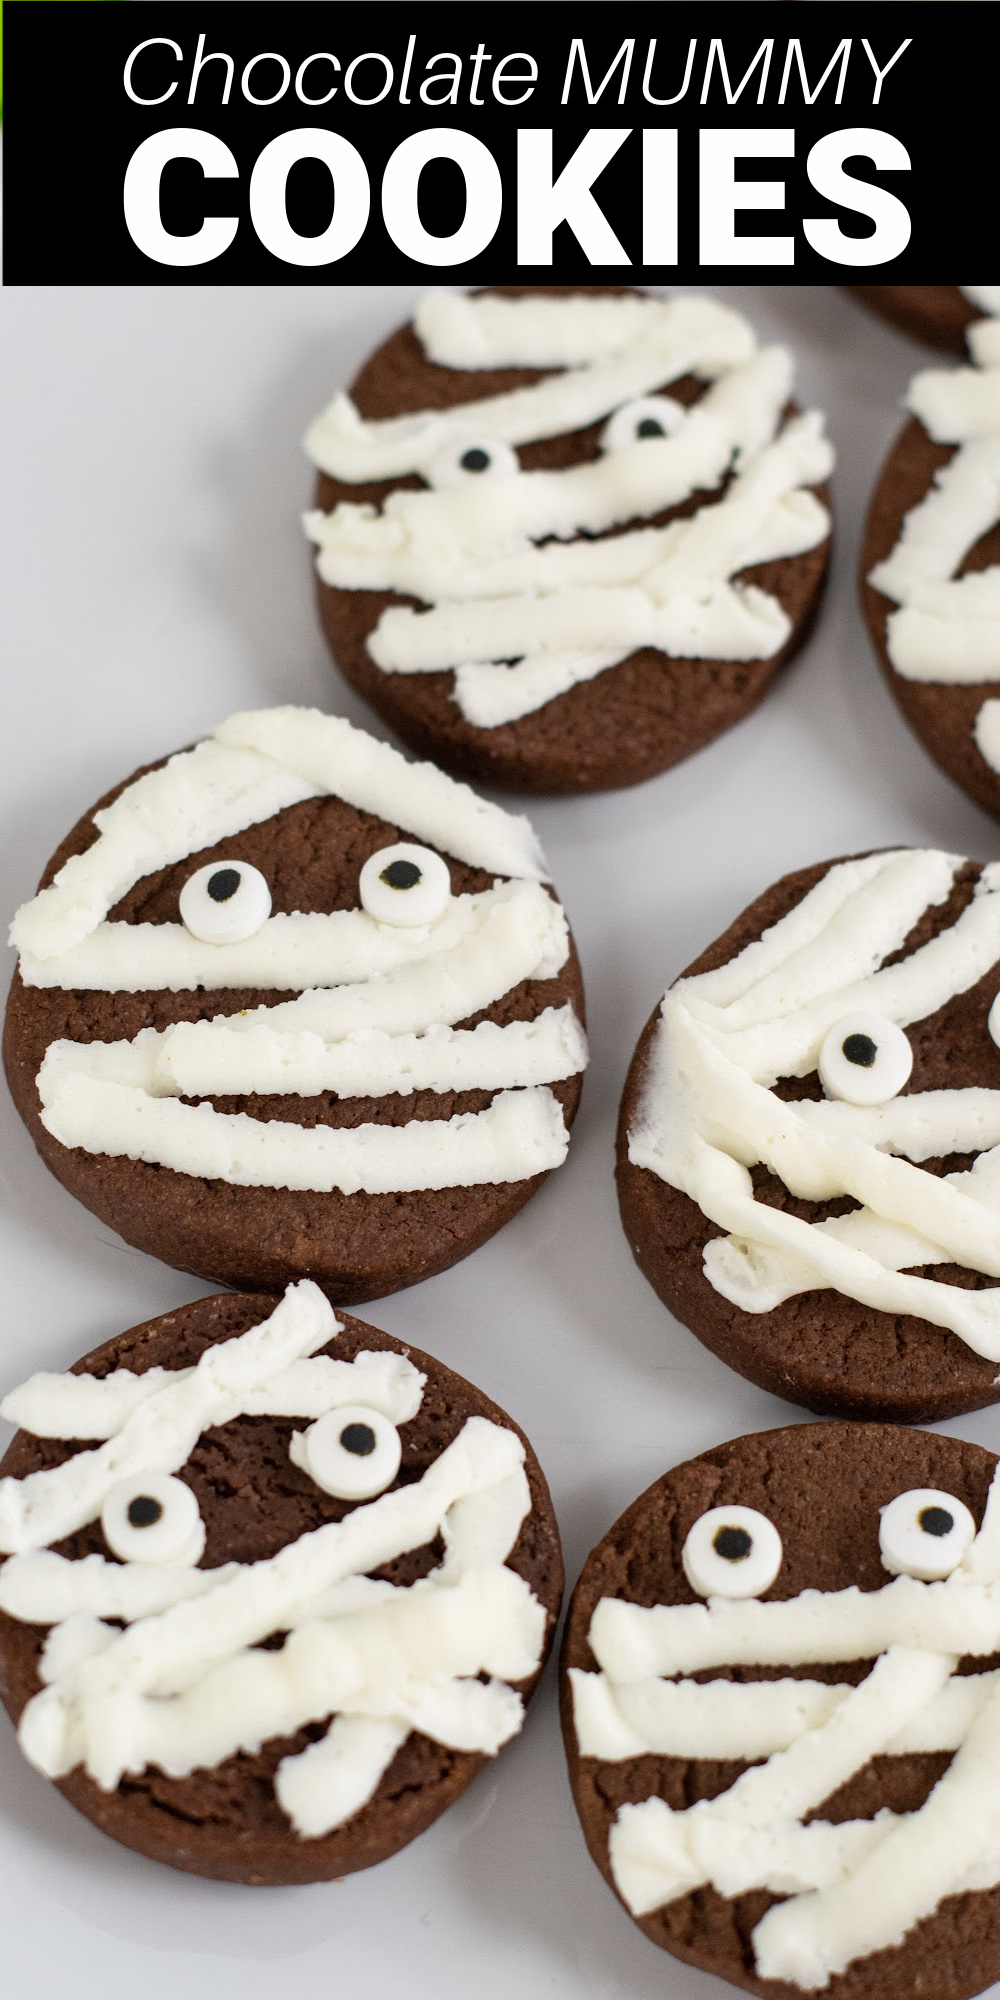 These mummy cookies are as easy to make as they are cute! The chewy chocolate cookie base is topped with strips of creamy buttercream frosting making the cutest Halloween treats. 